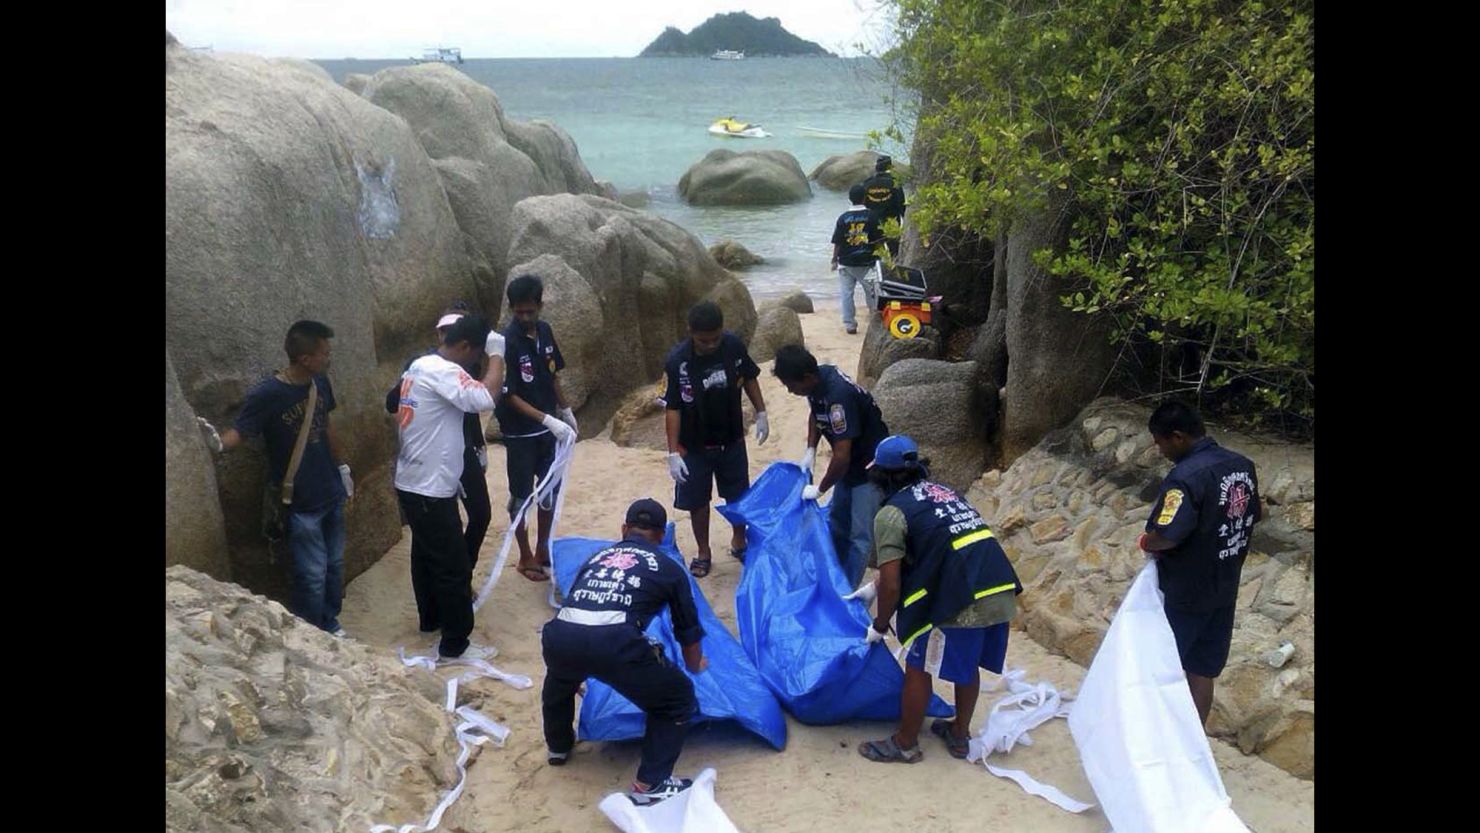 Thai police work near the bodies of two British tourists on a beach in the Surat Thani province of Thailand on Monday, September 15.